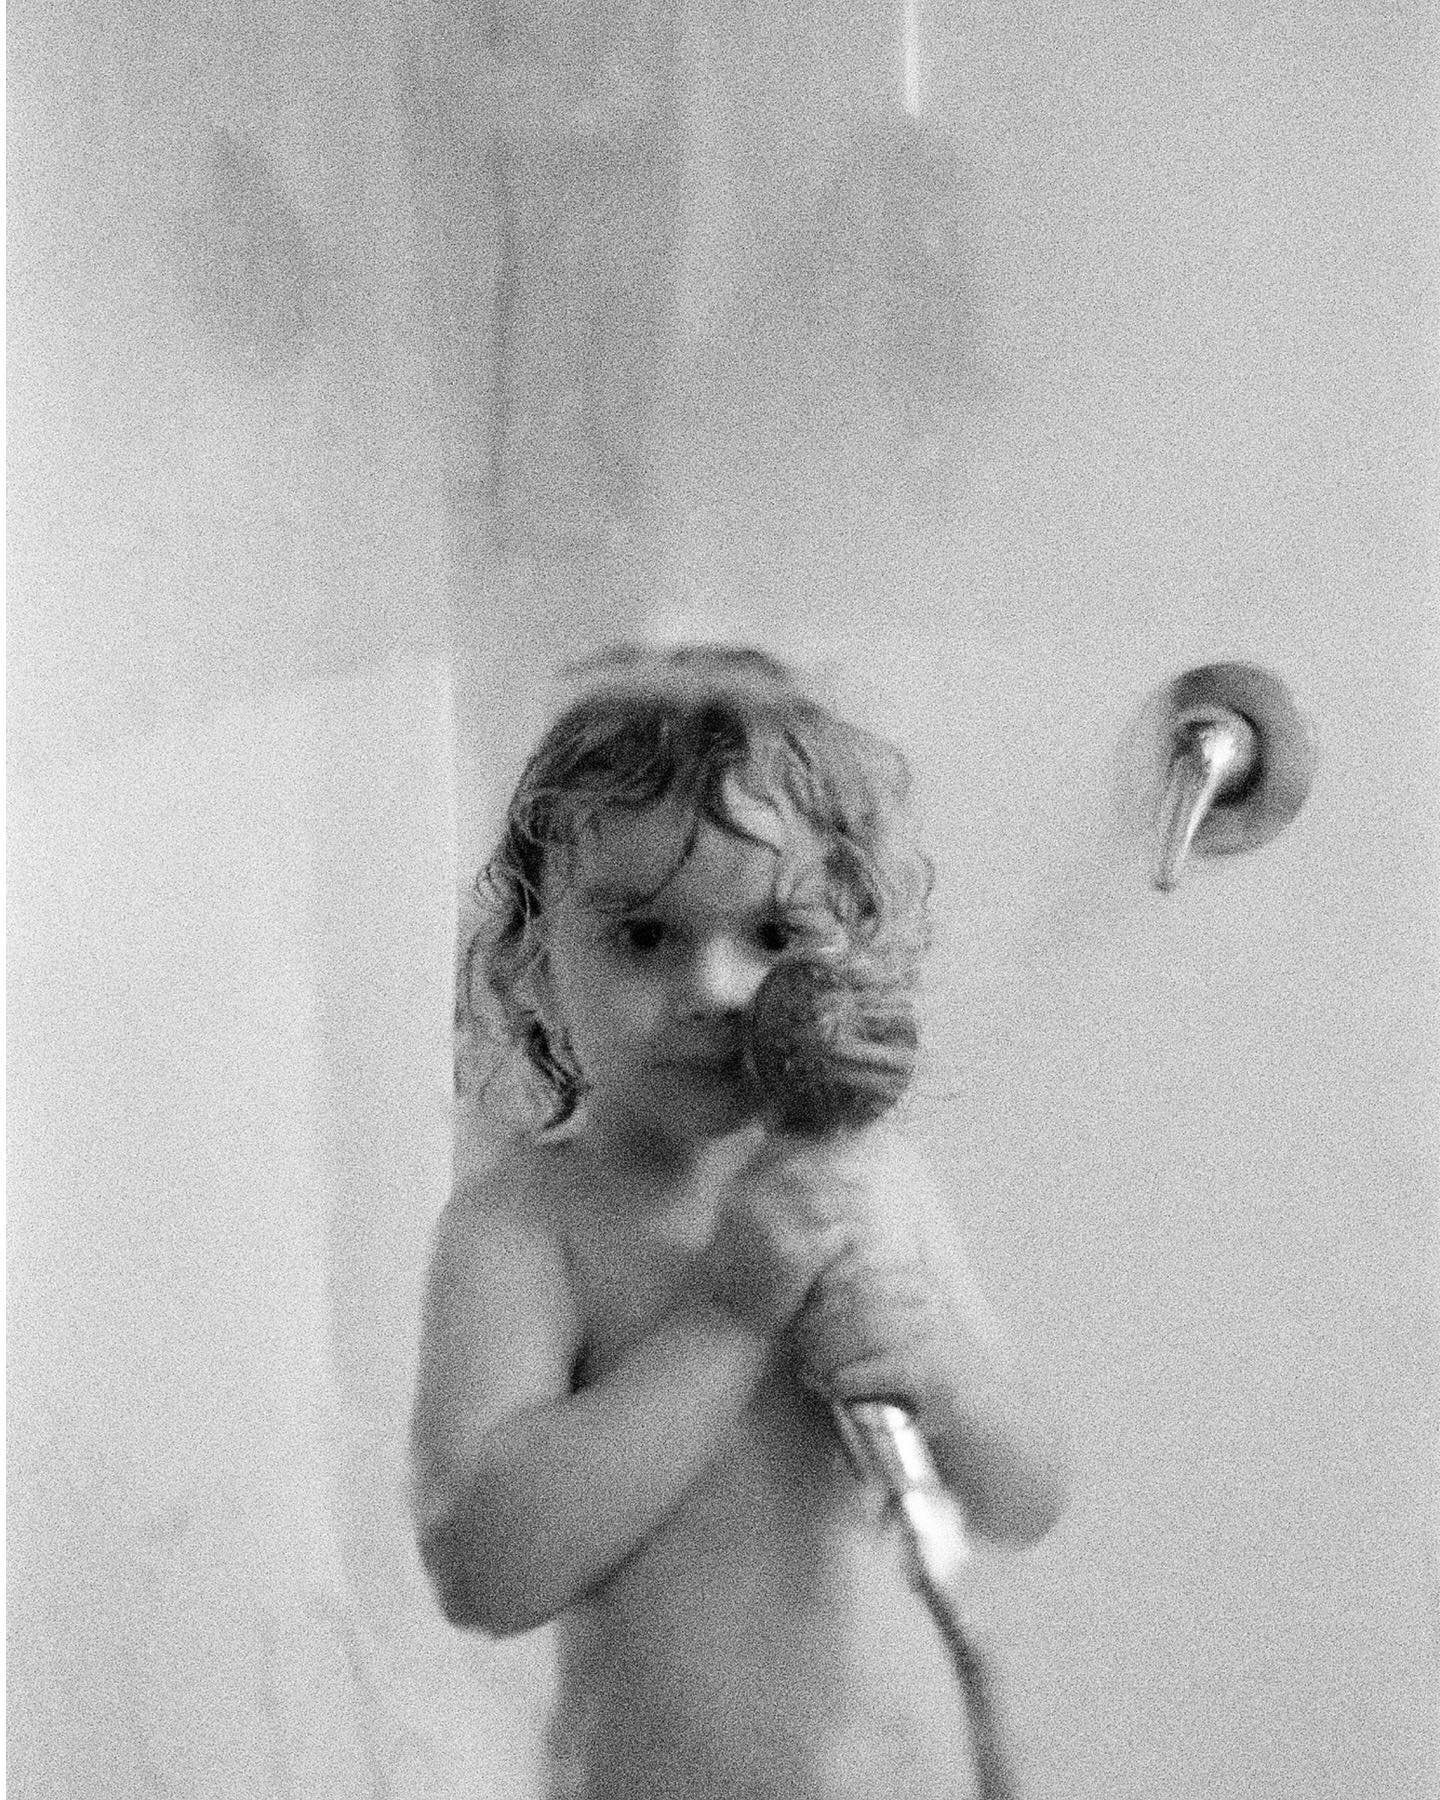 His blonde wet curls stuck to his head, curious eyes looking out at me, grabbing the shower head and trying to spray me through the shower glass &mdash; details that are simple and so sweet. 
⠀⠀⠀⠀⠀⠀⠀⠀⠀
Niko enjoying some rare third child alone time, 